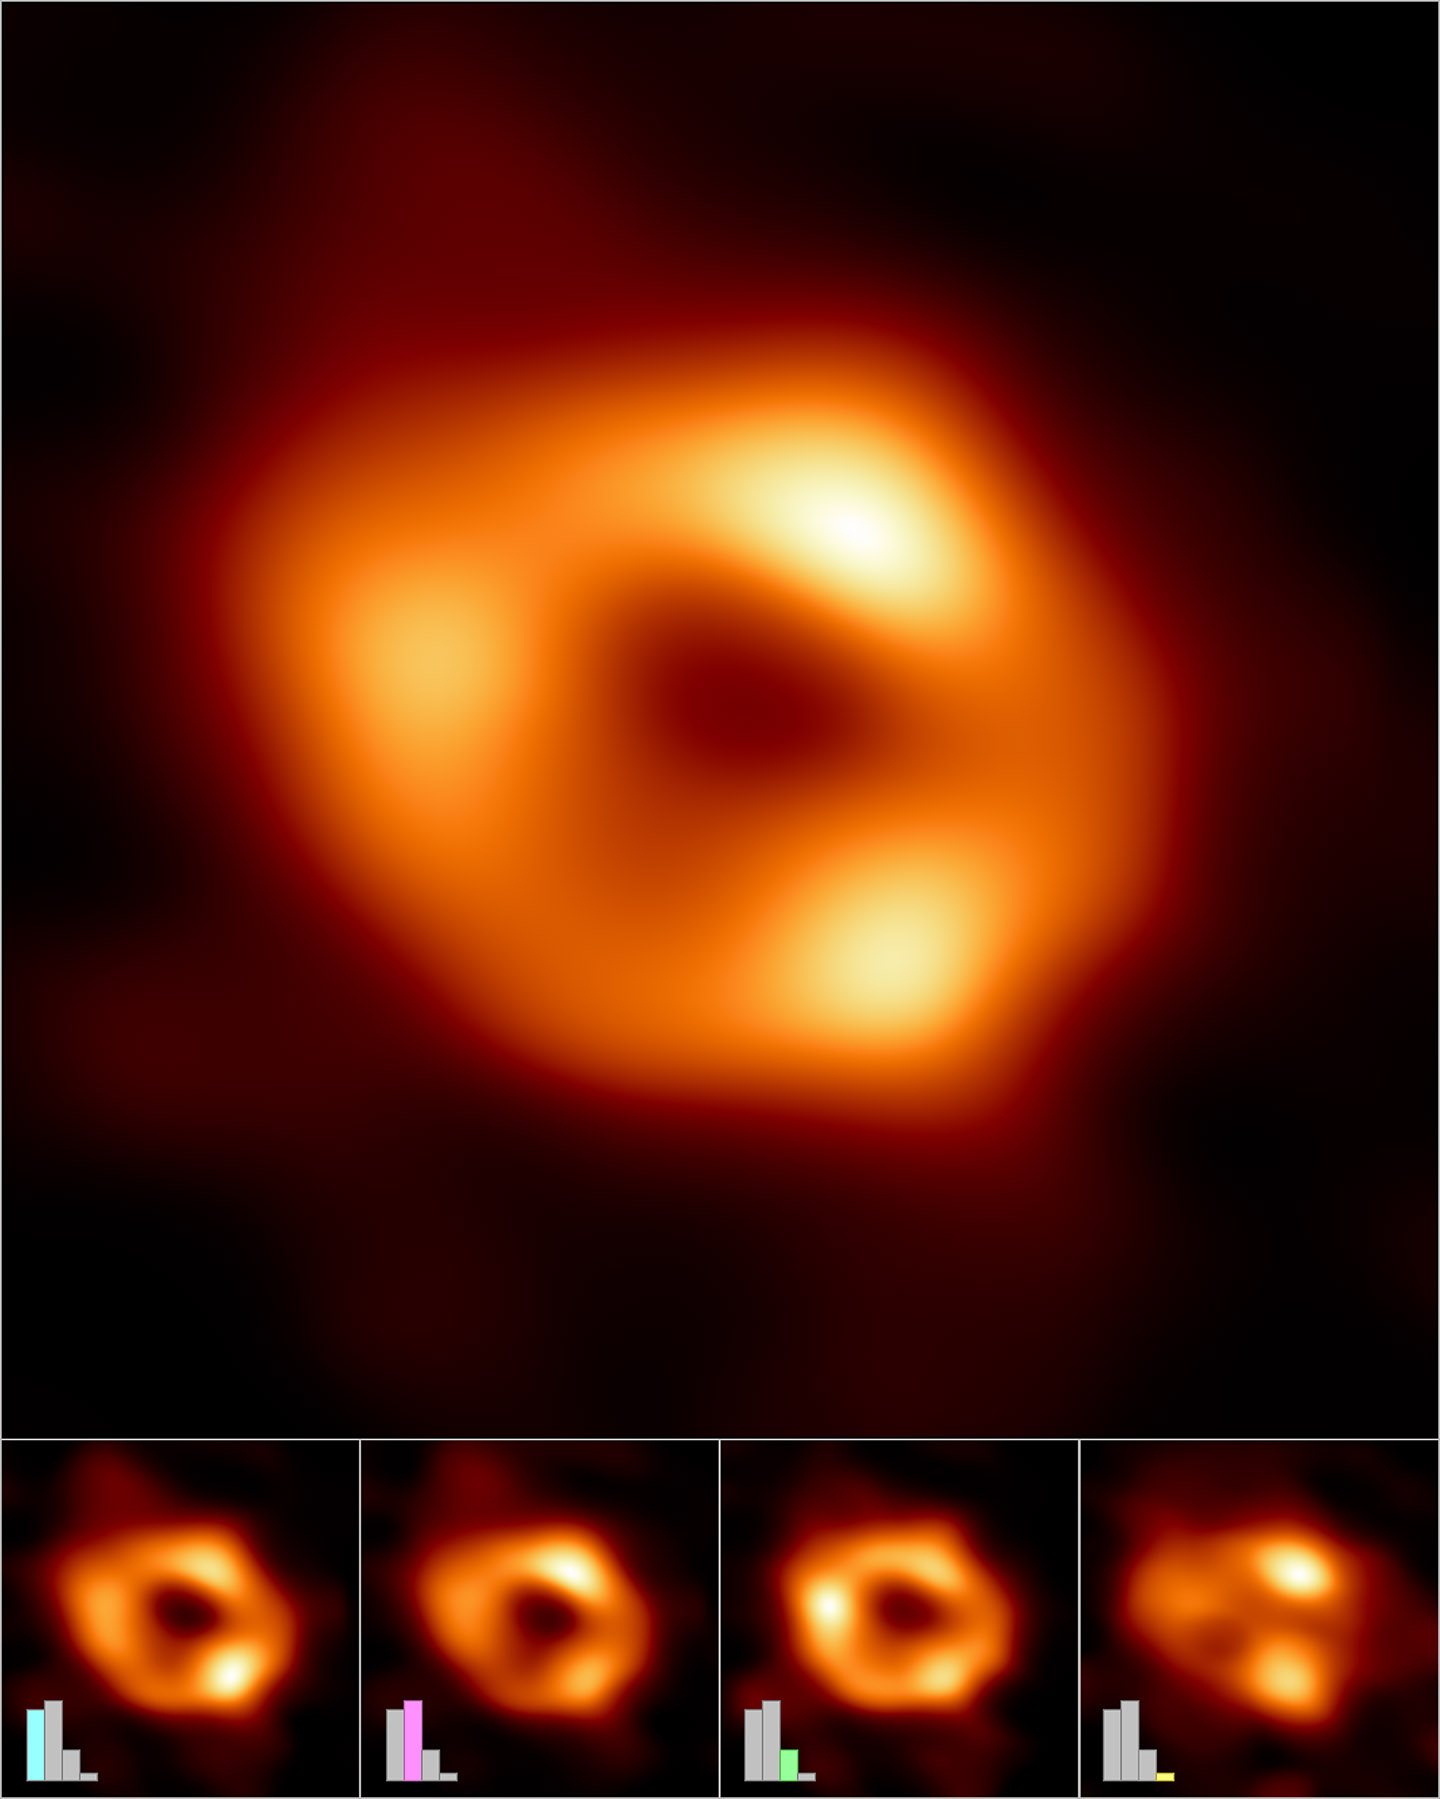 Making of the image of the black hole at the center of the Milky WayThe Event Horizon Telescope (EHT) Collaboration has created a single image (top frame) of the supermassive black hole at the center of our galaxy, called Sagittarius A* (or Sgr A* for short), by combining images extracted from the EHT observations.The main image was produced by averaging together thousands of images created using different computational methods — all of which accurately fit the EHT data. This averaged image retains features more commonly seen in the varied images, and suppresses features that appear infrequently.The images can also be clustered into four groups based on similar features. An averaged, representative image for each of the four clusters is shown in the bottom row. Three of the clusters show a ring structure but, with differently distributed brightness around the ring. The fourth cluster contains images that also fit the data but do not appear ring-like.The bar graphs show the relative number of images belonging to each cluster. Thousands of images fell into each of the first three clusters, while the fourth and smallest cluster contains only hundreds of images. The heights of the bars indicate the relative "weights," or contributions, of each cluster to the averaged image at top.